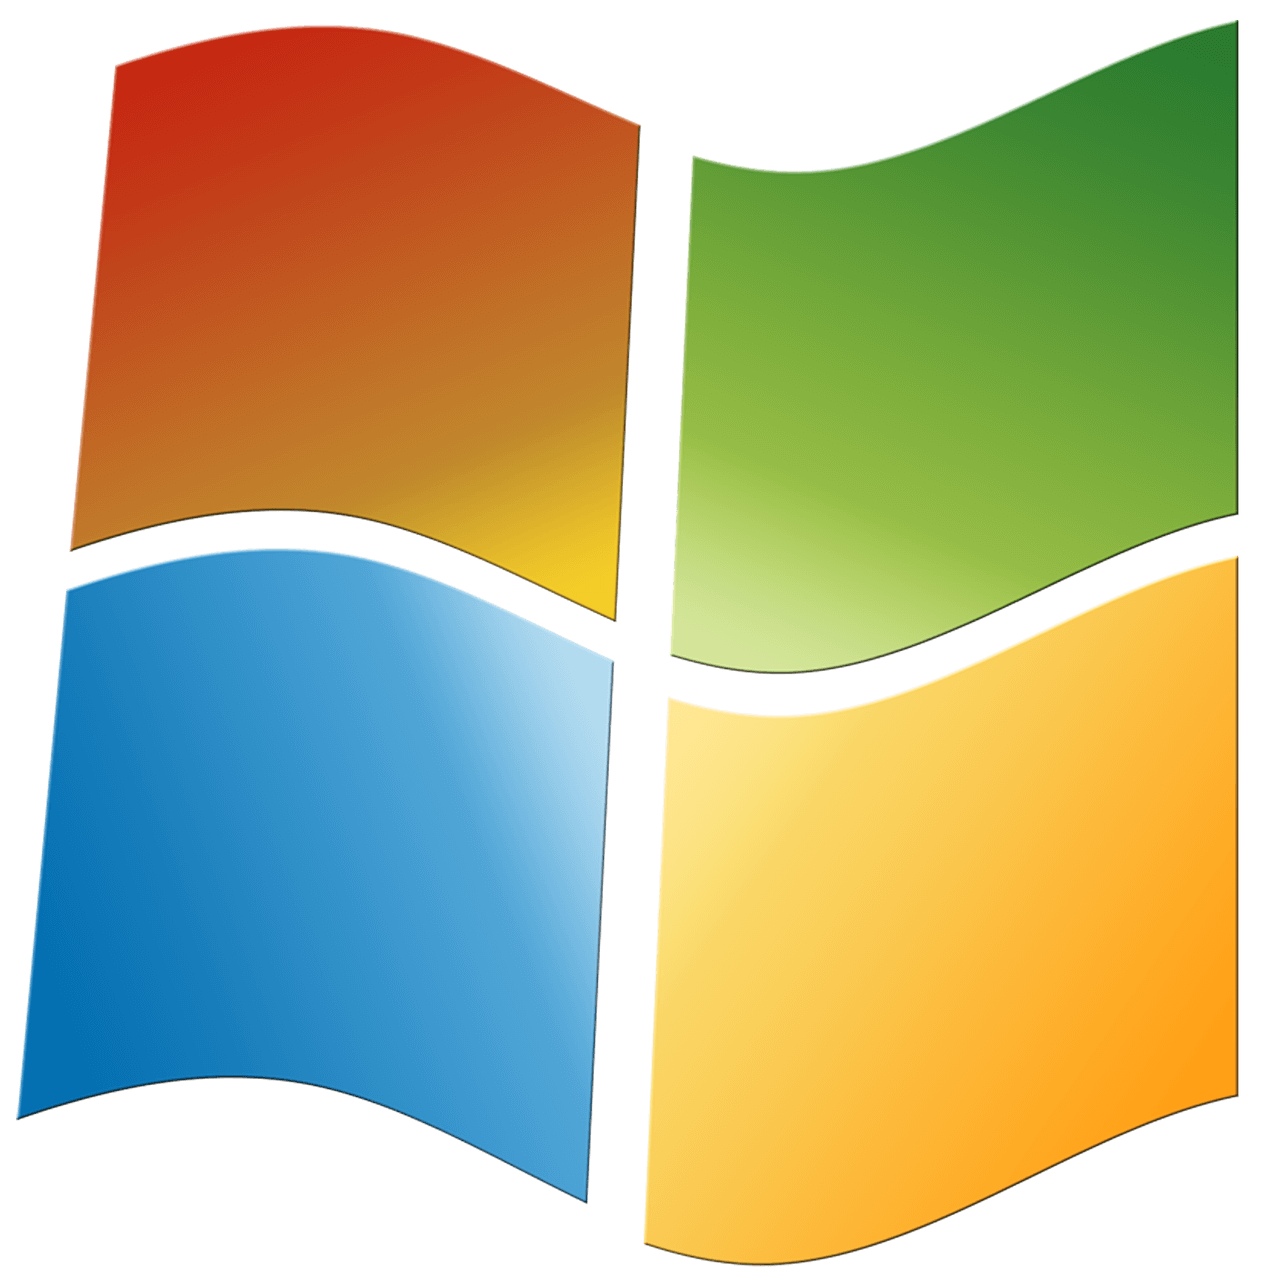 Windows 7 Patch Tuesday update includes Telemetry components